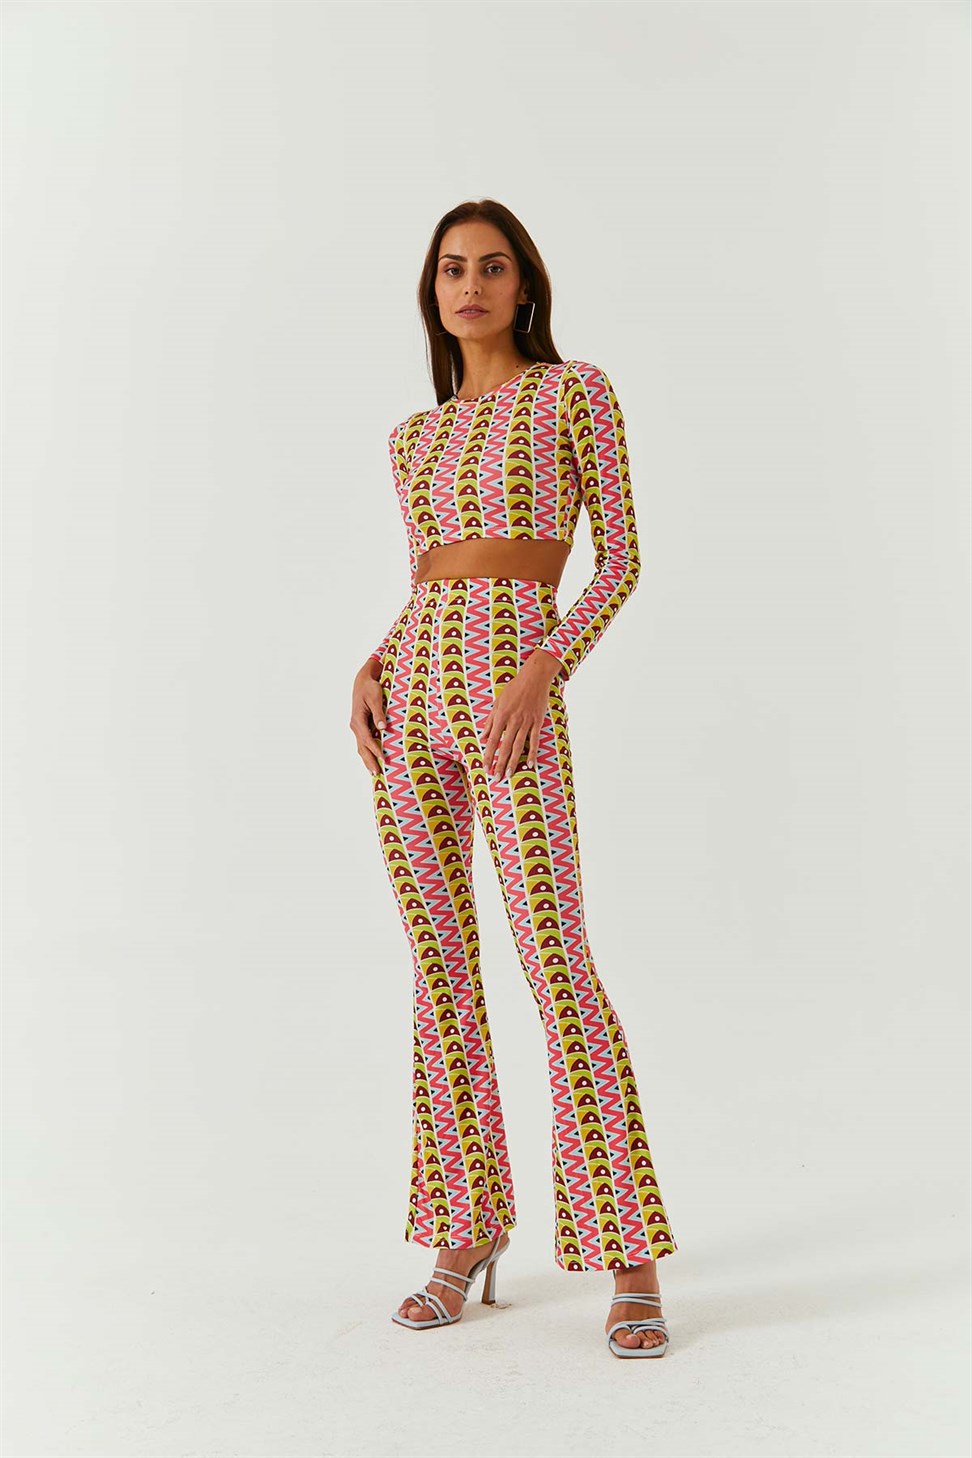 Colorful patterned crop yellow woman team